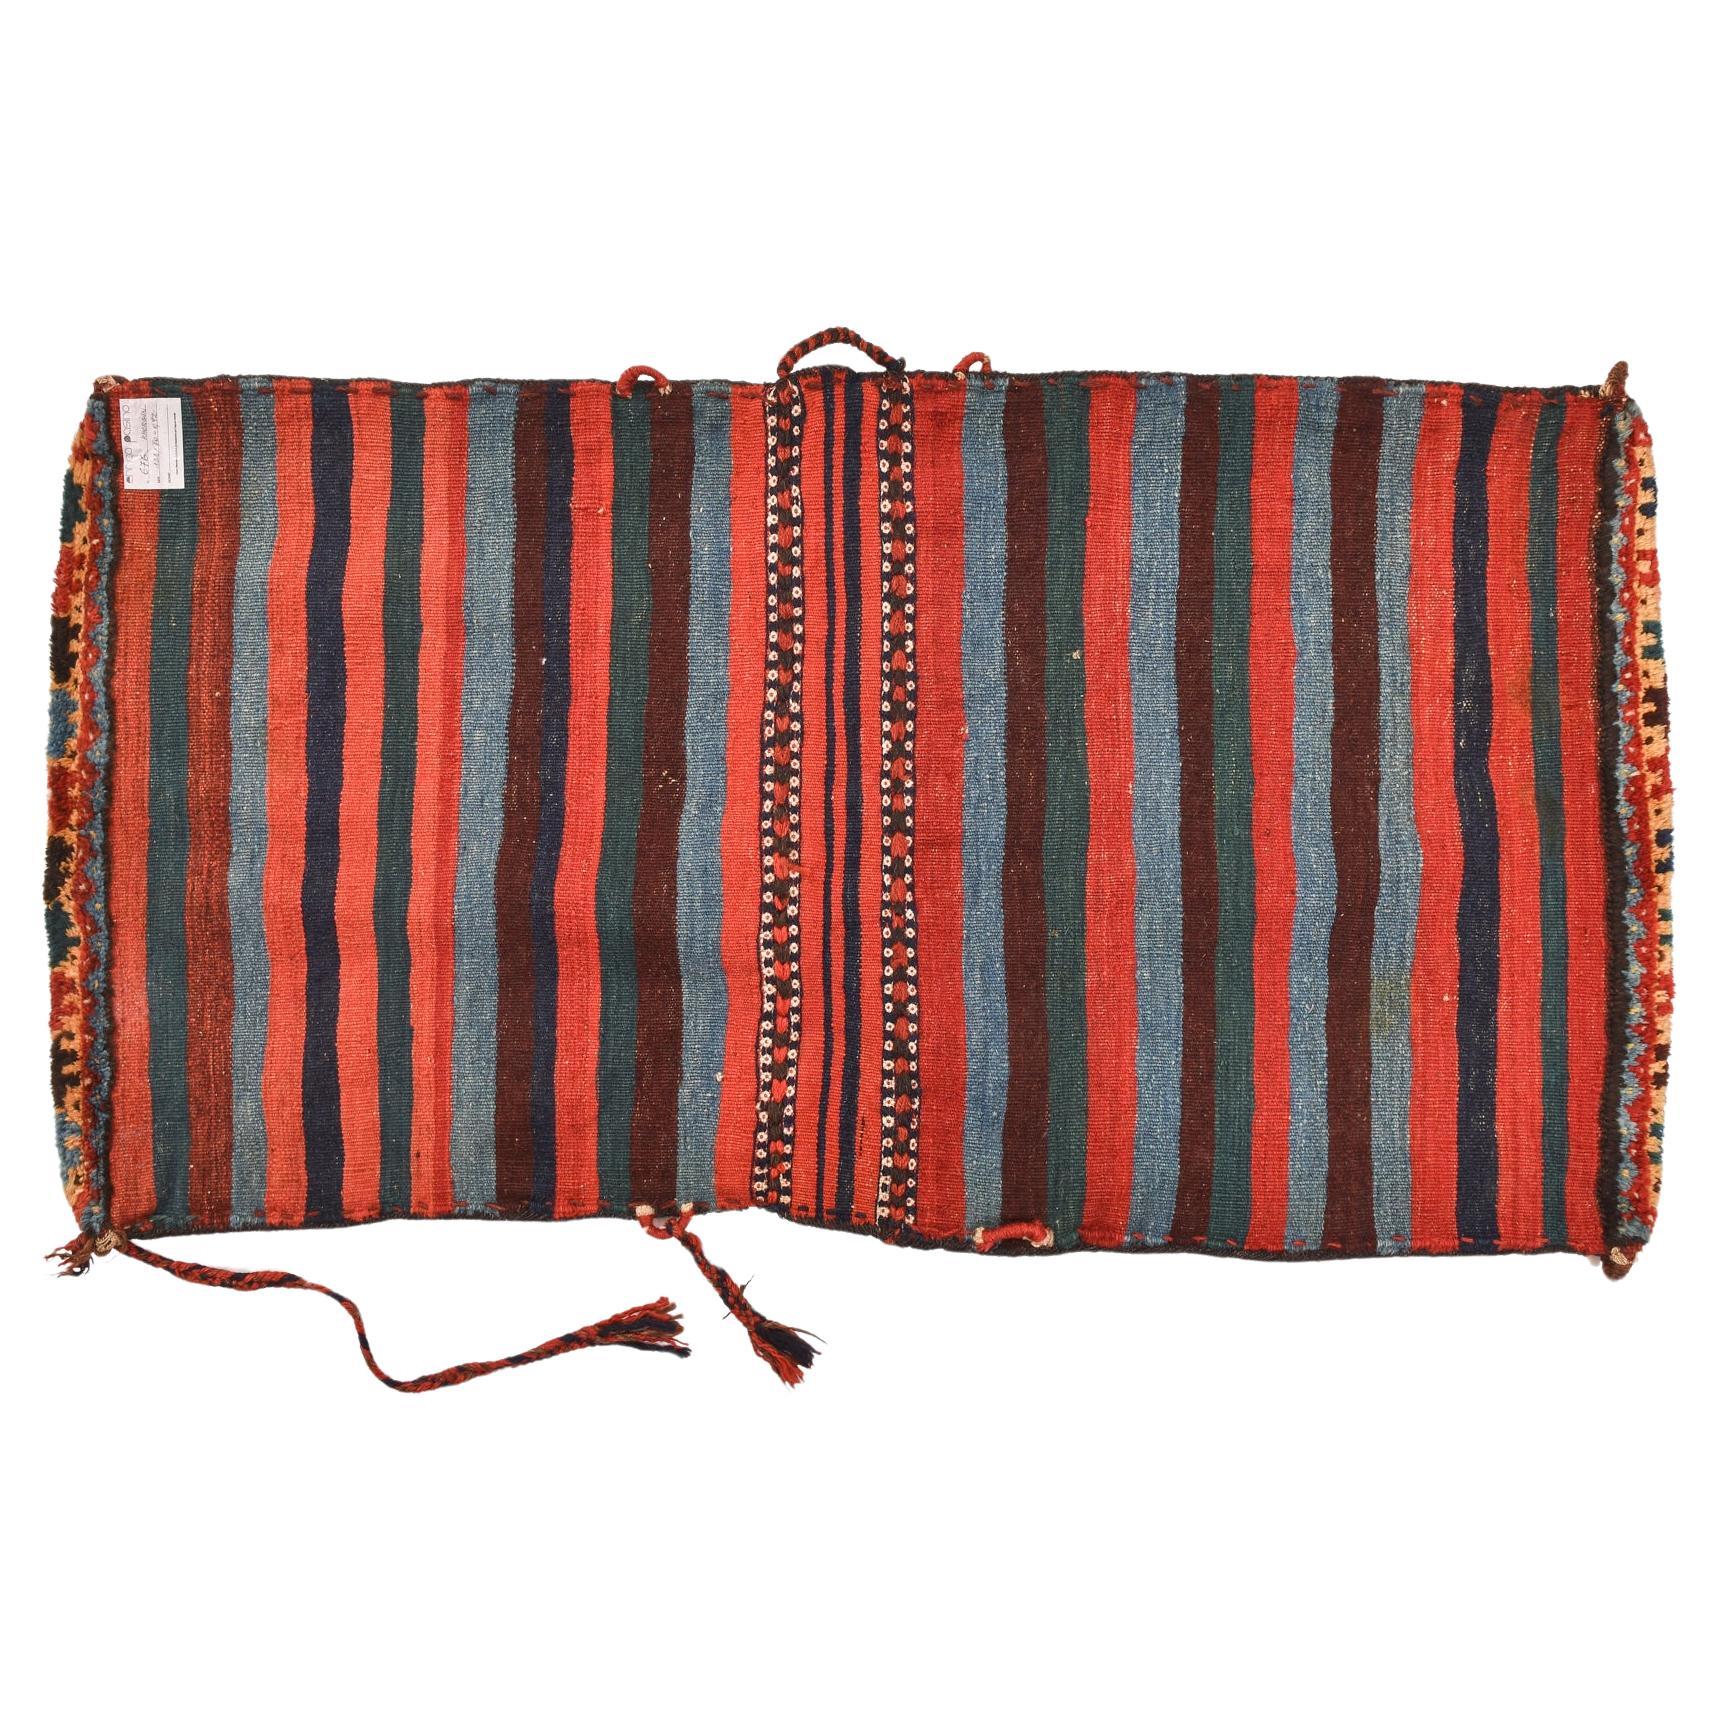 Other Shahsavan Nomads' Antique Pouch from My Private Collection For Sale